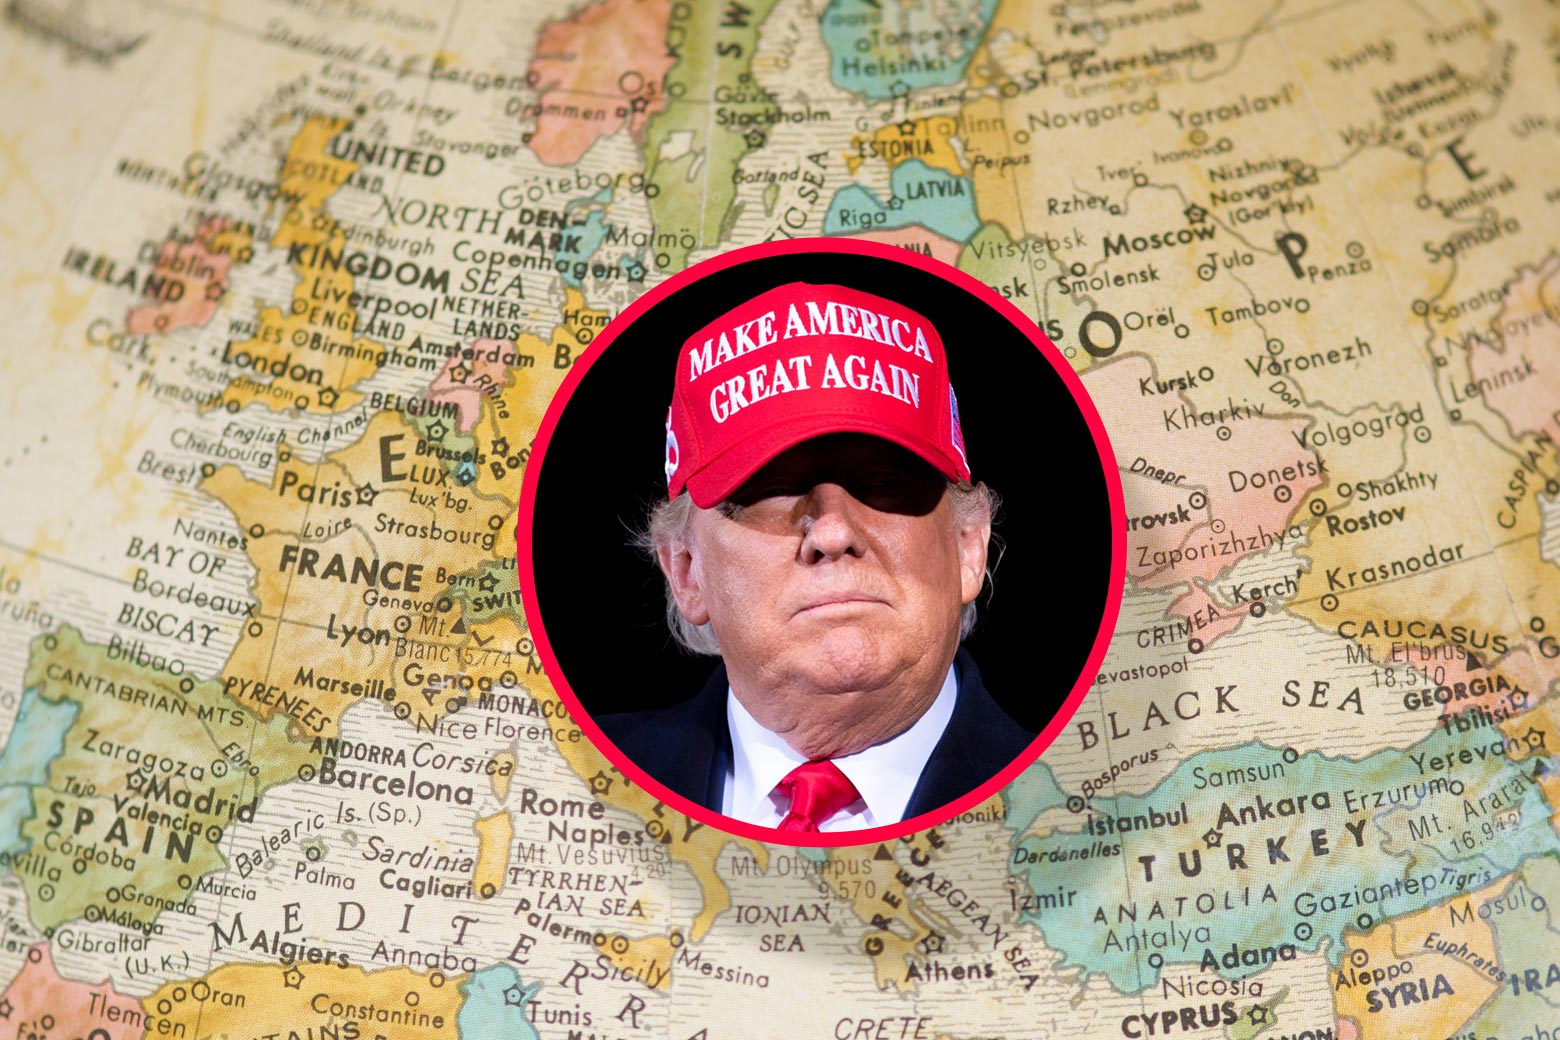 Trump wearing a MAGA hat in a circle superimposed on a globe